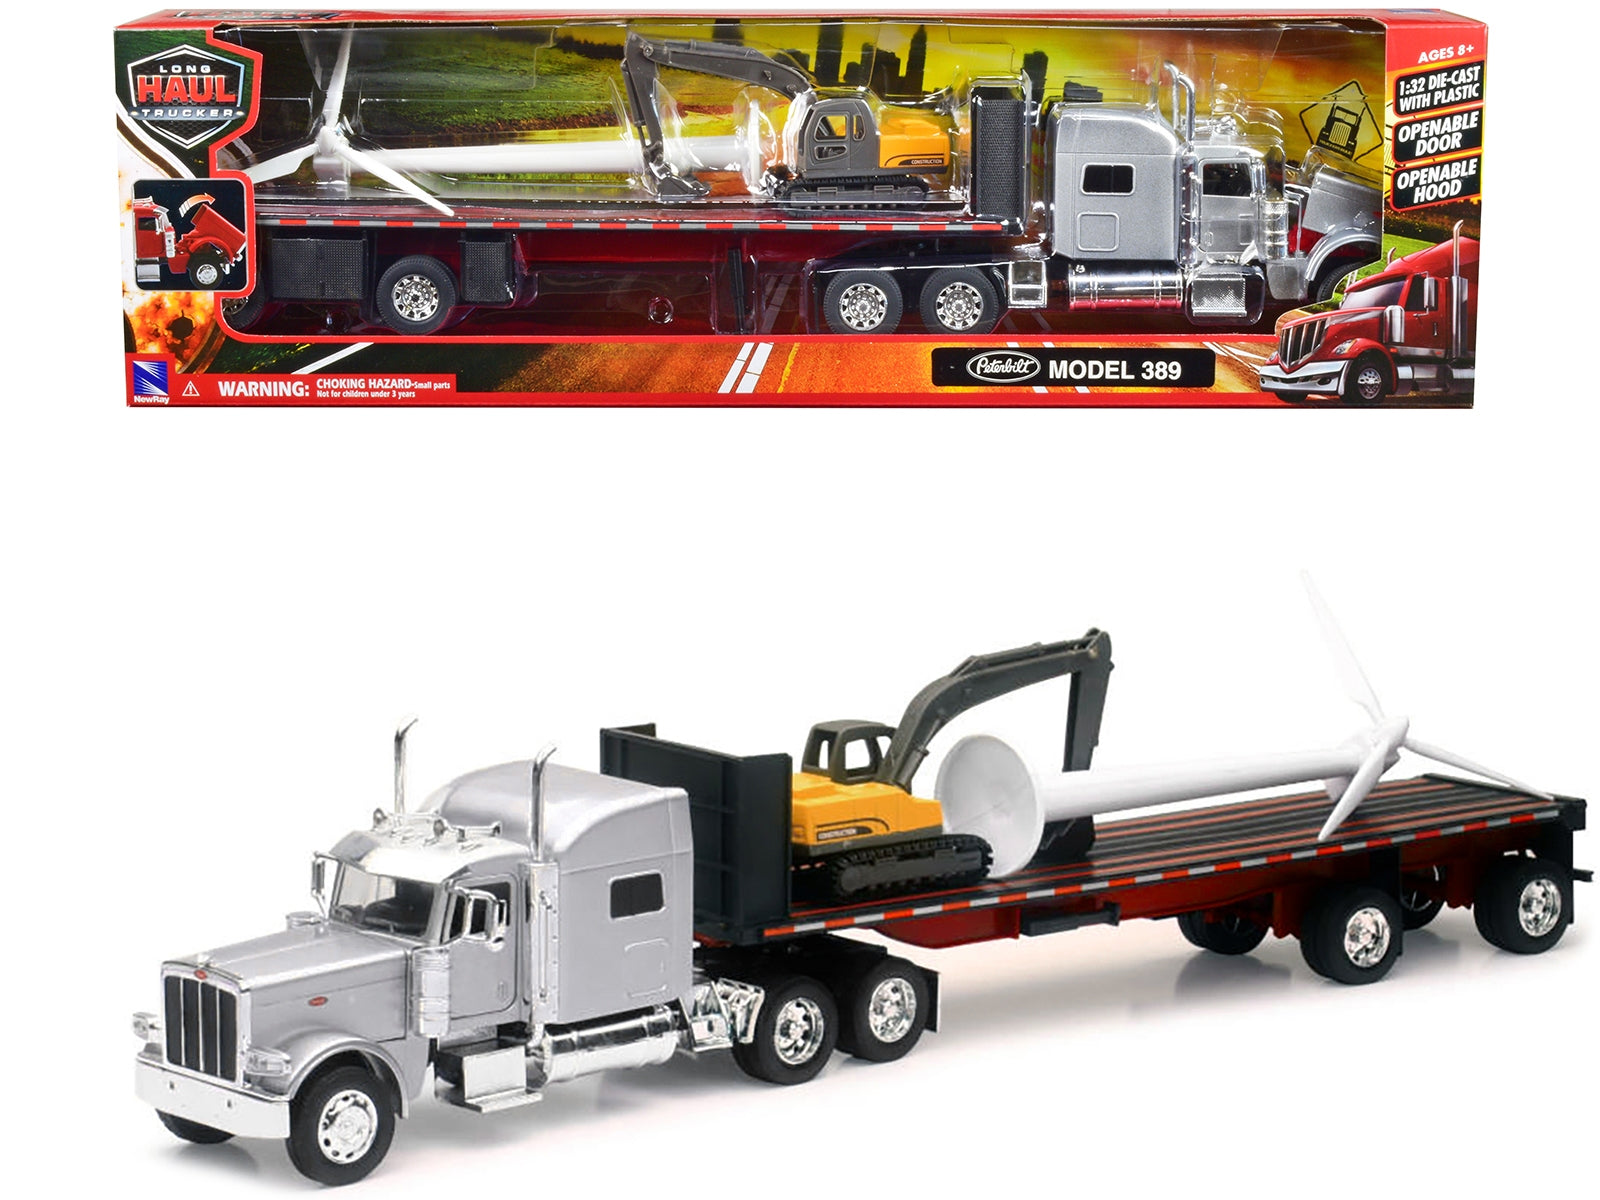 Peterbilt 389 Truck with Flatbed Trailer Silver Metallic with Excavator and Wind Turbine "Long Haul Truckers" Series 1/32 Diecast Model by New Ray